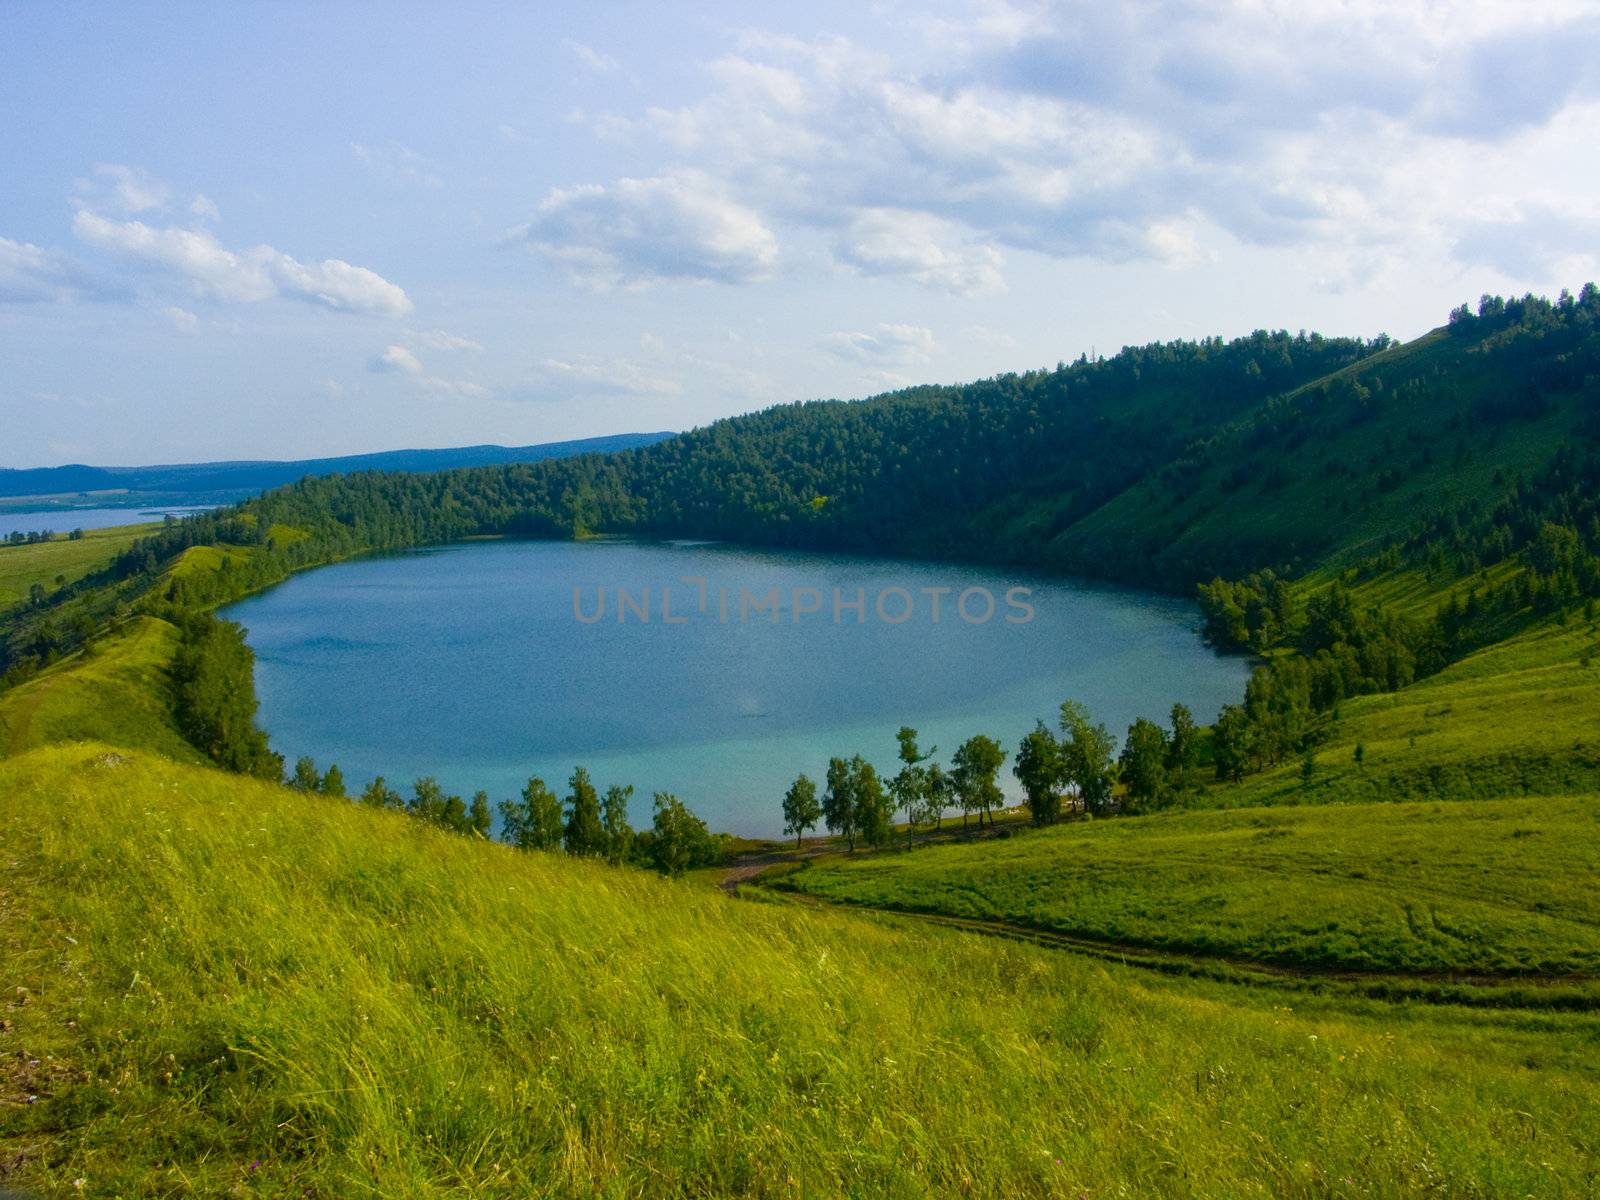 the image of the lake located in a hollow of a hill